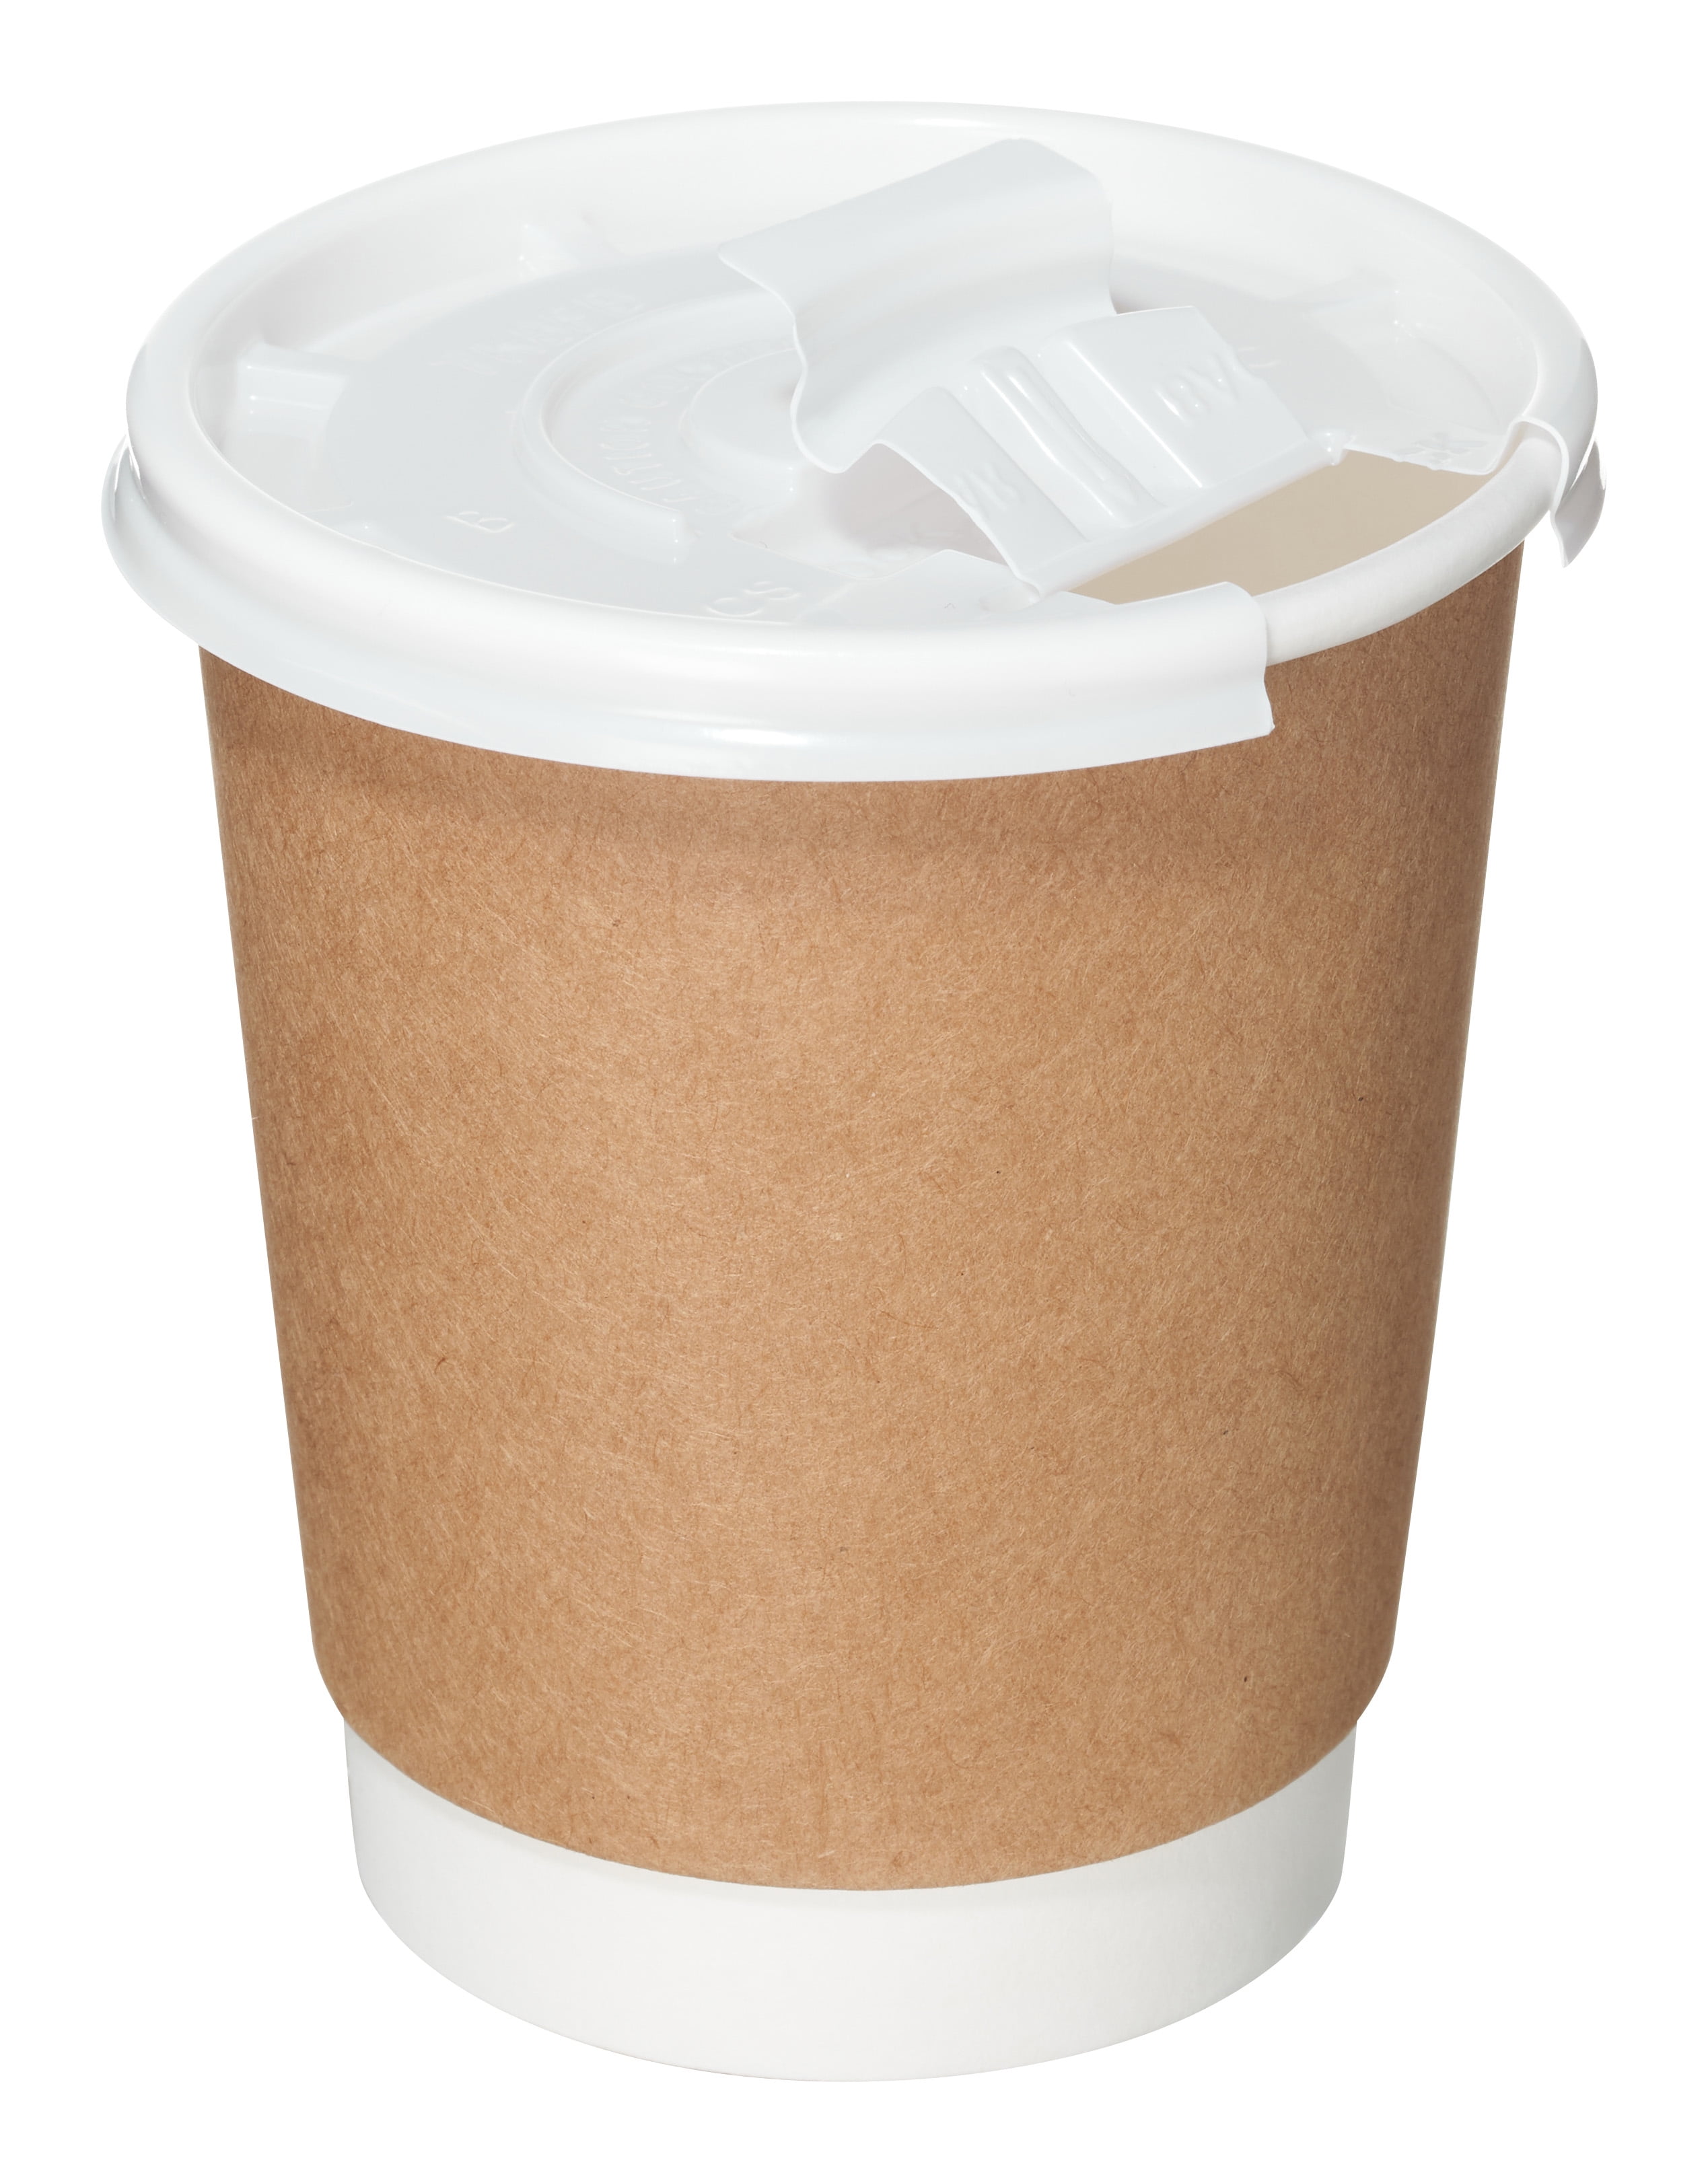 8 oz RippIe Wall Insulated Disposable Paper Coffee Cups with Lids 50 PACK 